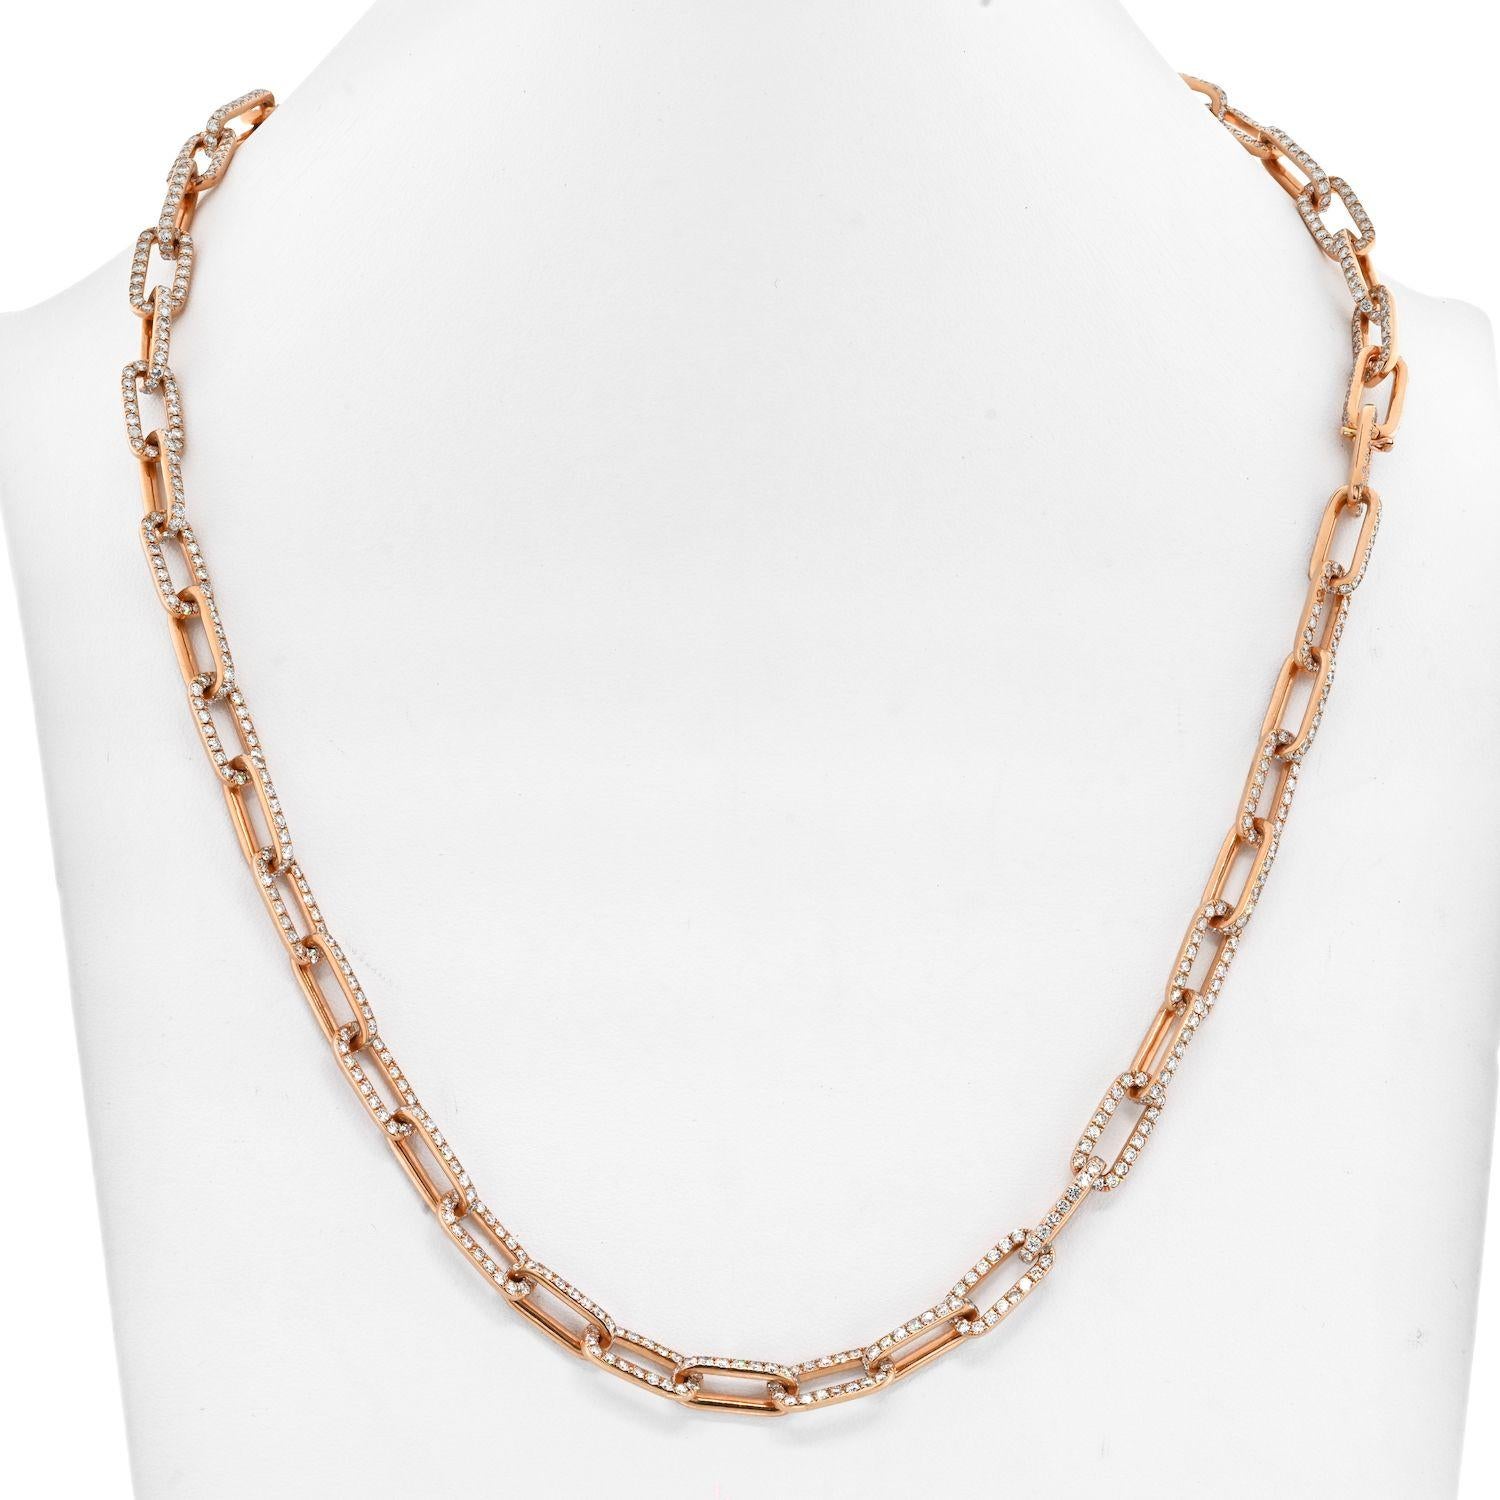 18K Rose Gold 21 Carat Diamond Link Chain Necklace.
Crafted out of 18K rose gold, every paperclip link is accented with round-cut diamonds, total diamond weight is approximately 21 carats; length 22 inches; weight 58 g.  
Stamped 18K. 